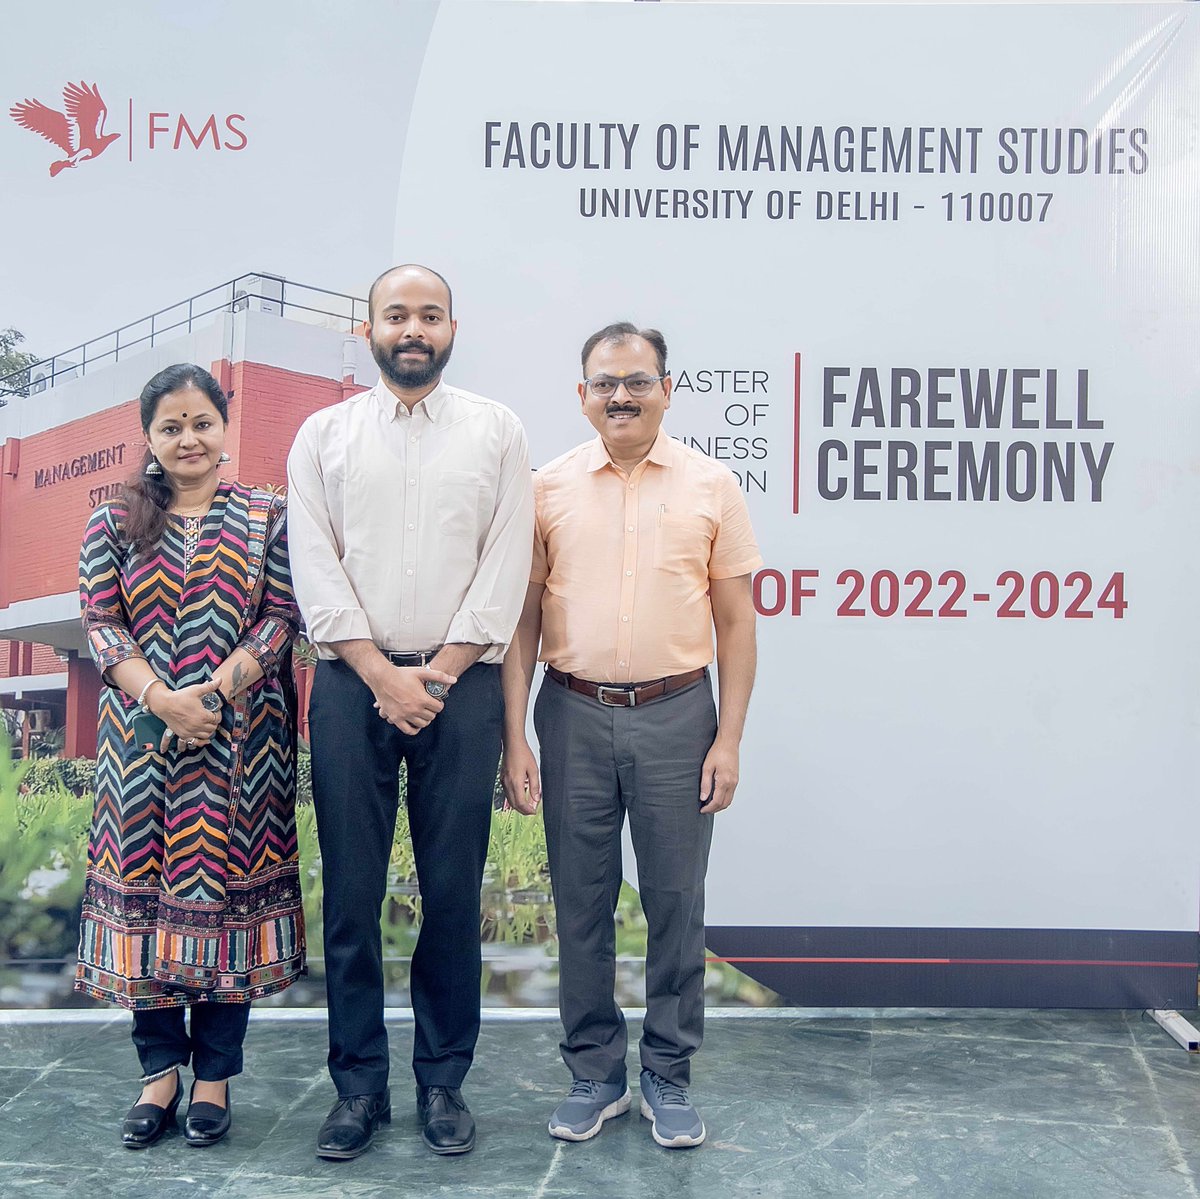 #NewProfilePic
My son, Mr. Kishlay Dwivedi has been awarded an MBA from FMS (DU).